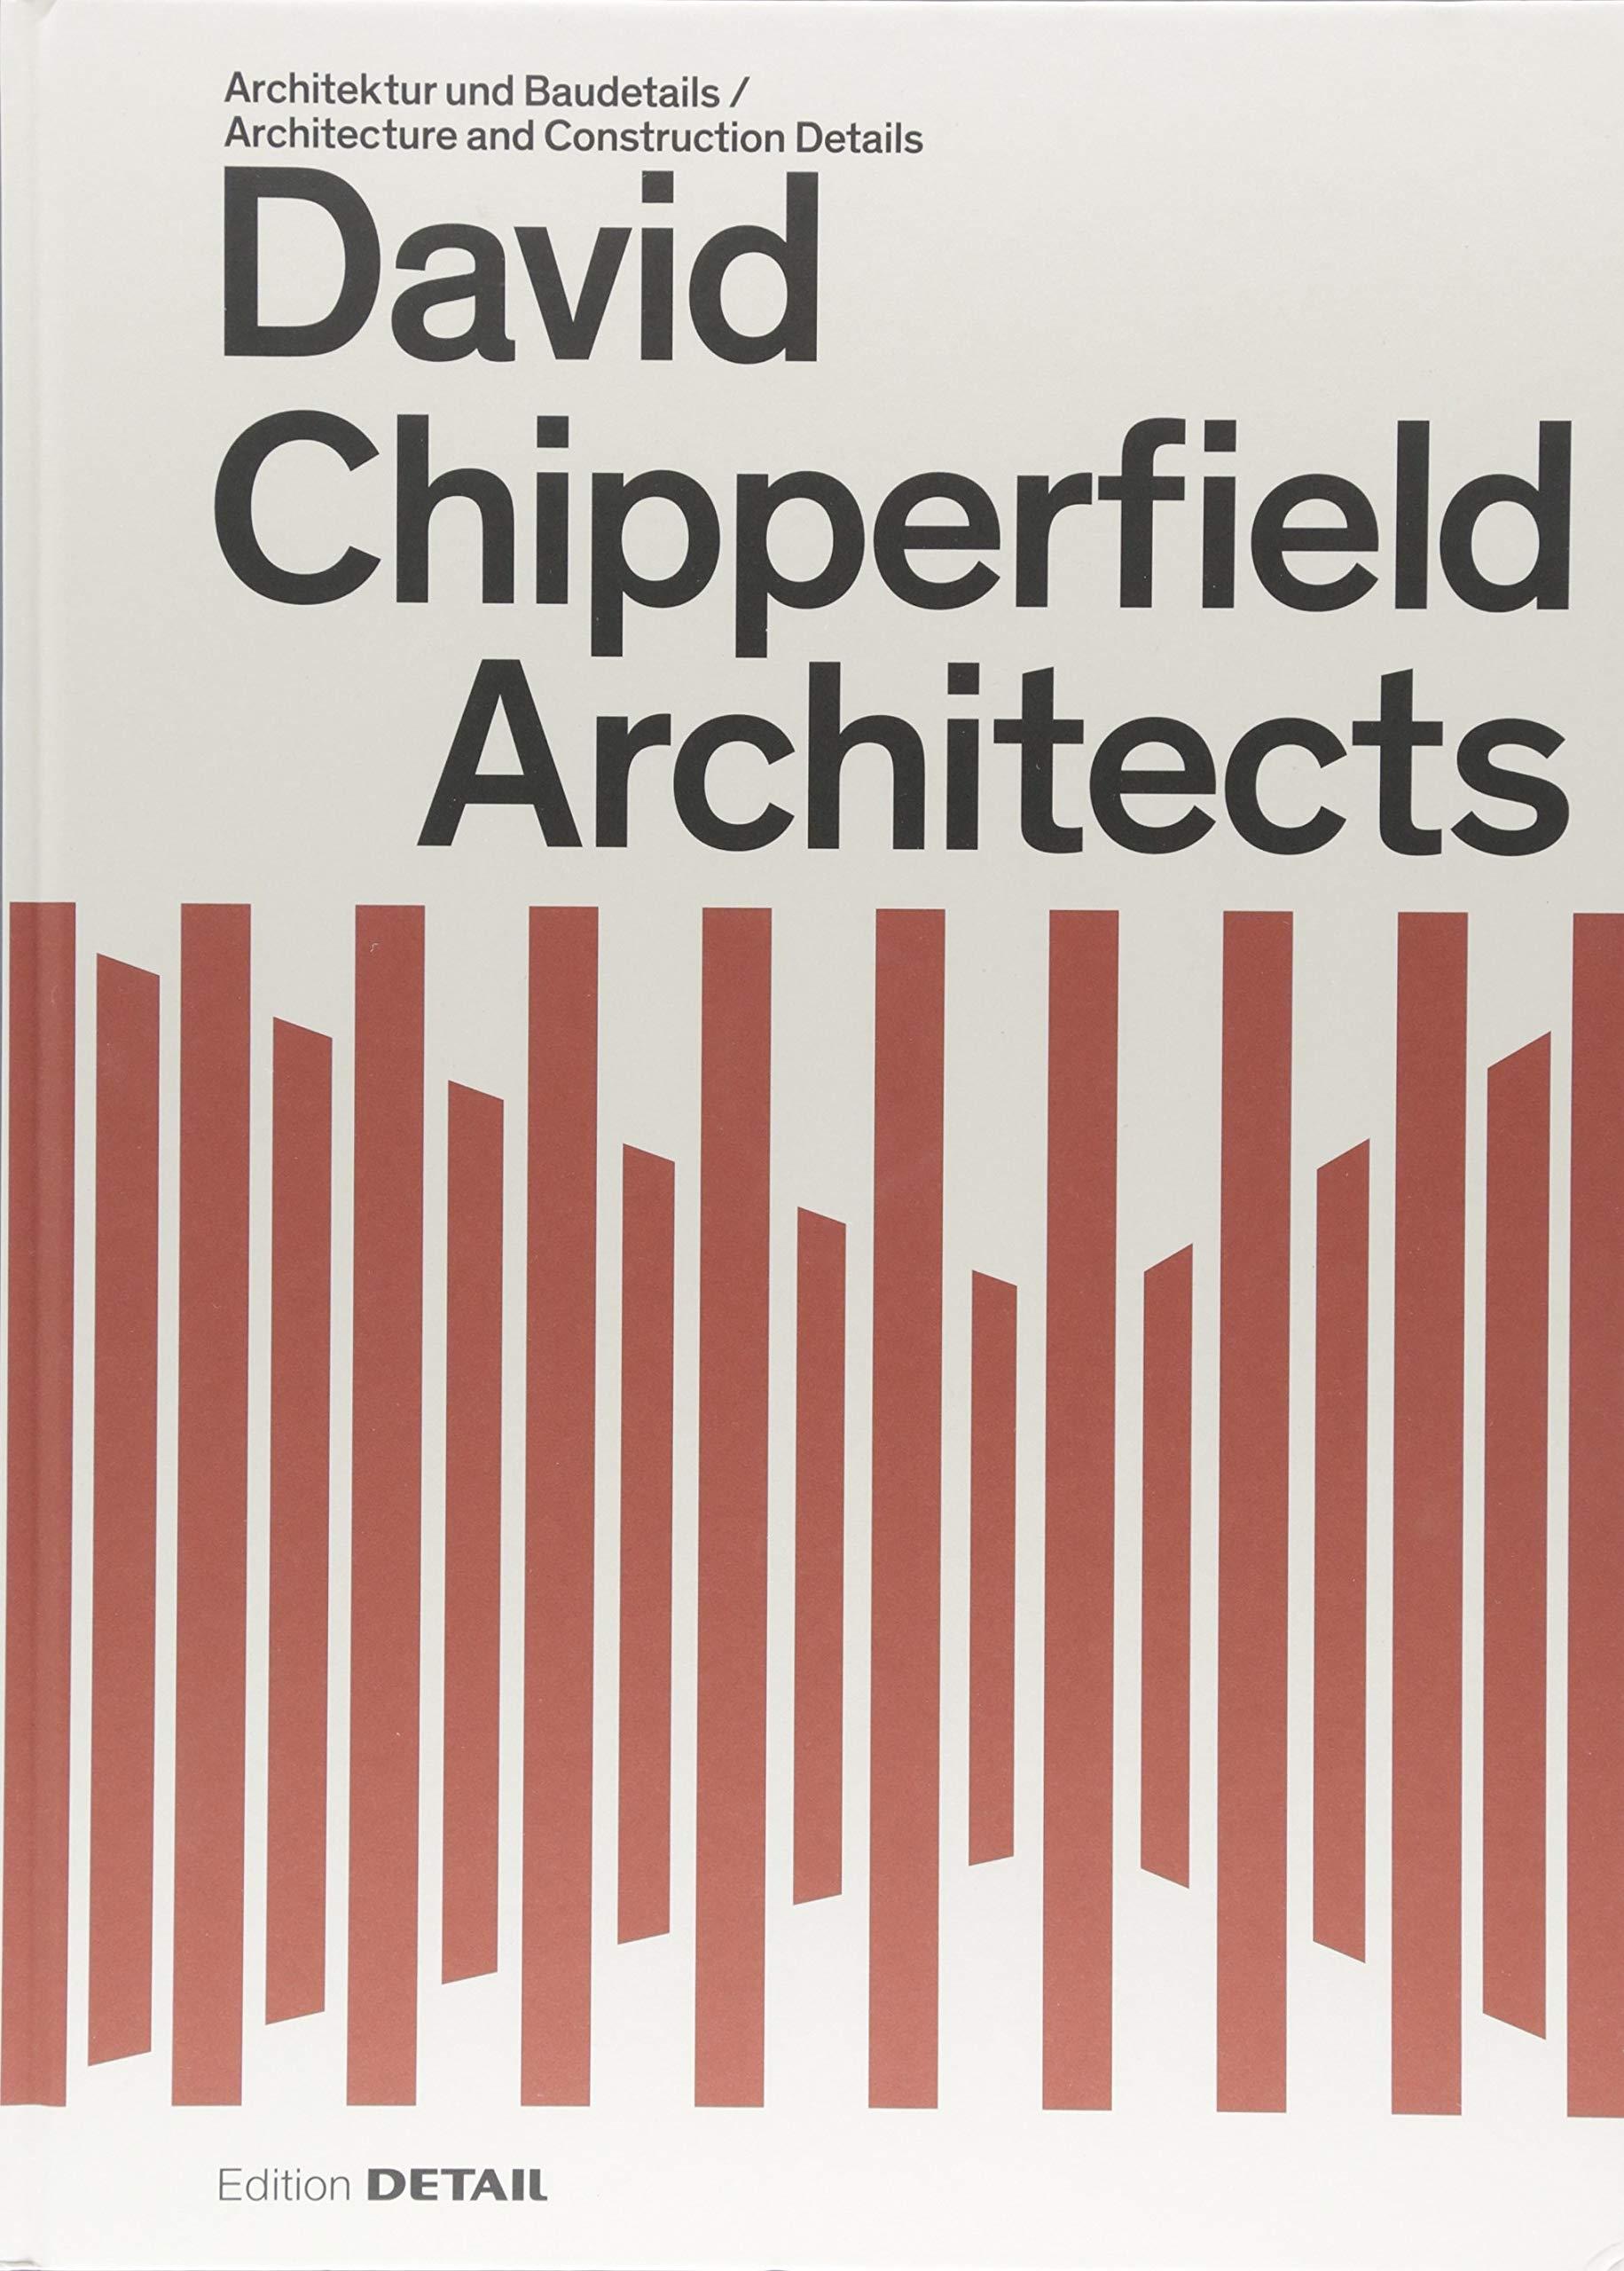 CHIPPERFIELD: DAVID CHIPPERFIELD ARCHITECTS. DETAIL. 